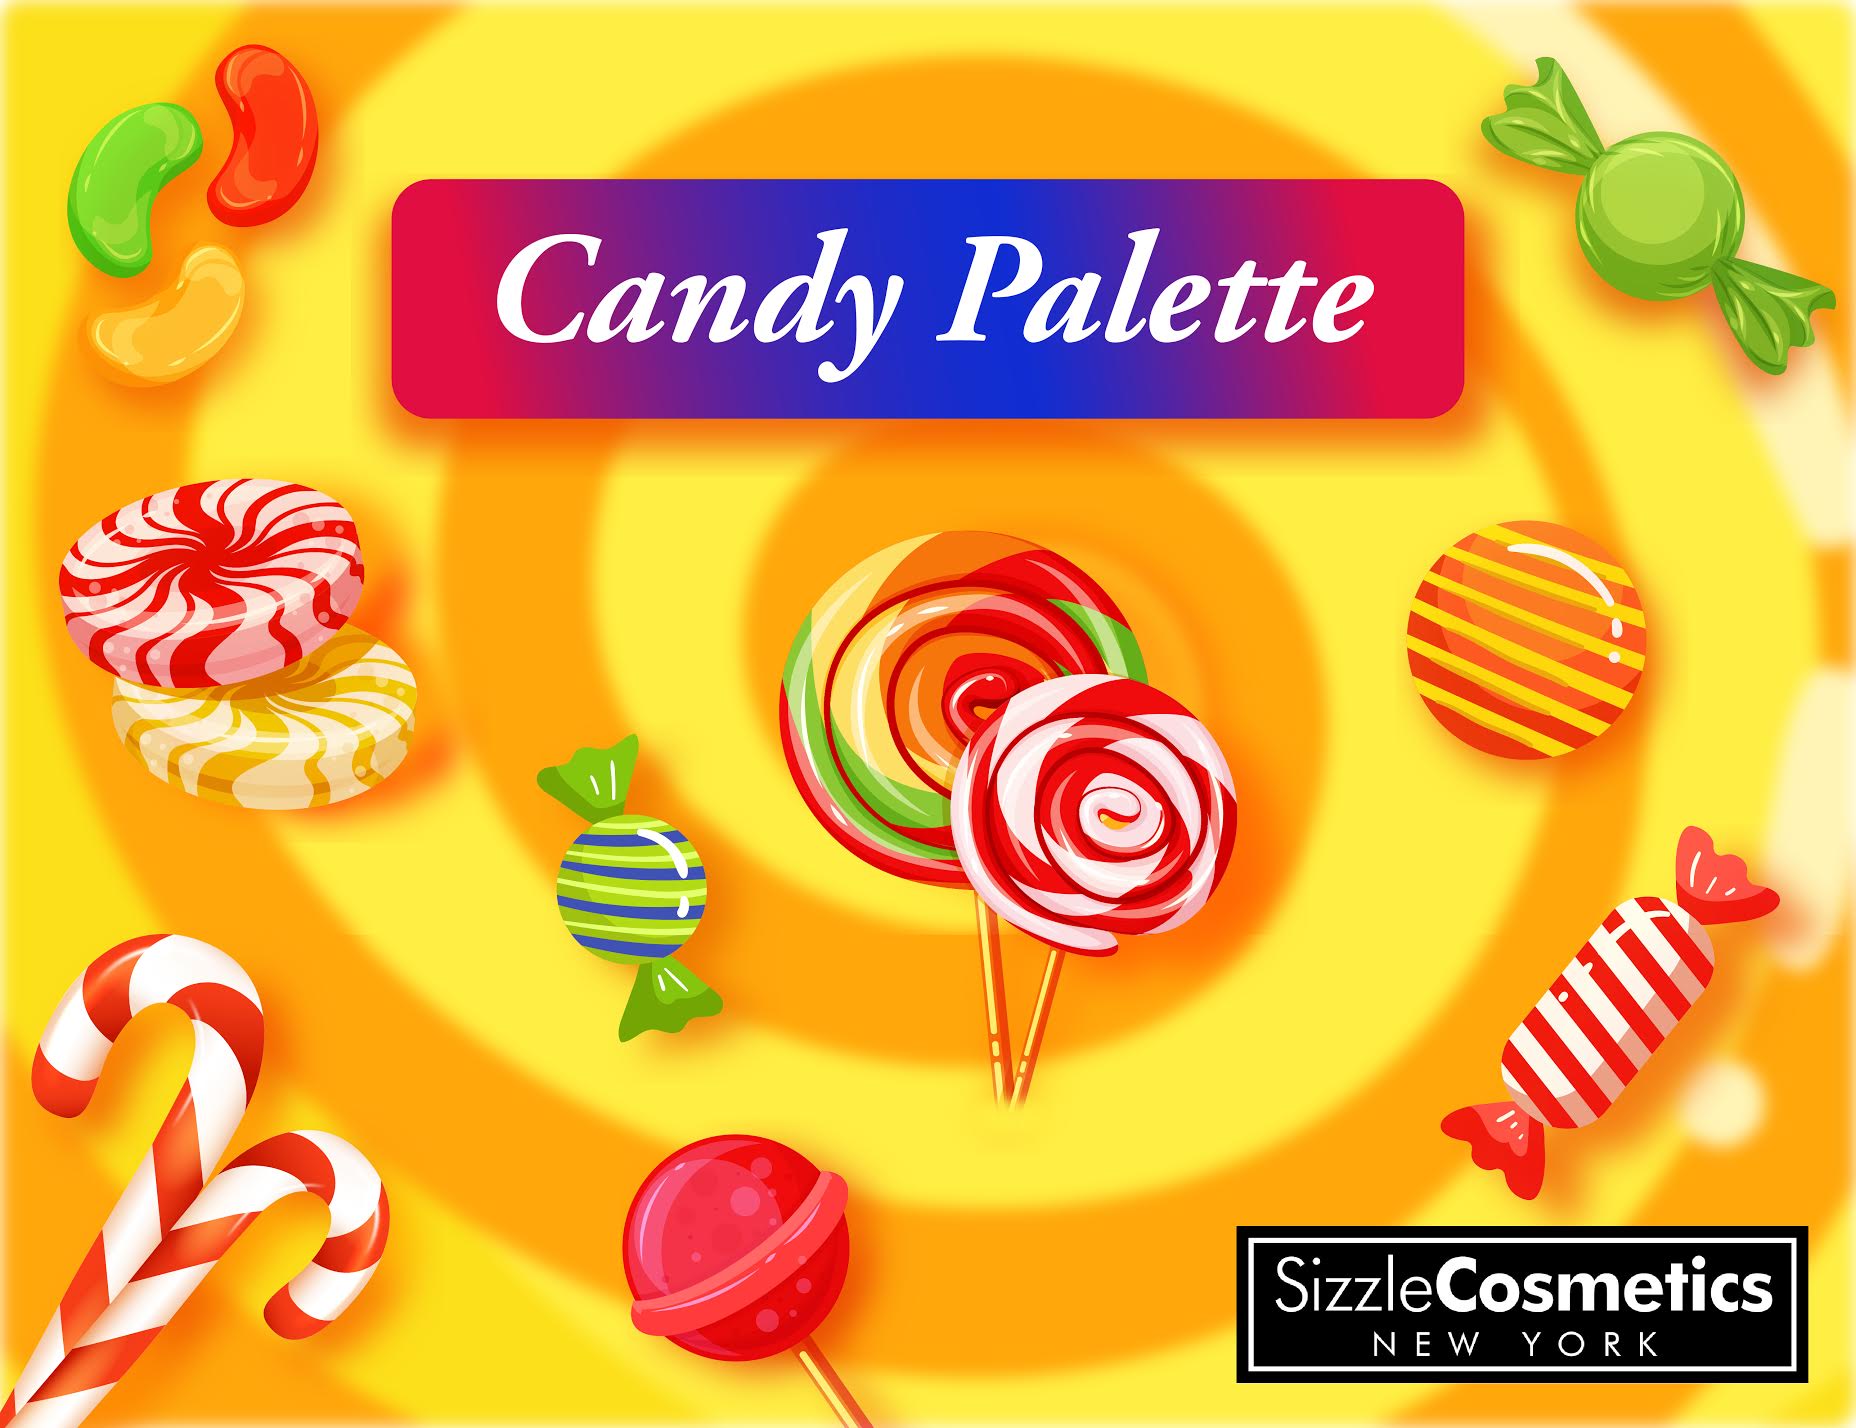 house-of-sizzle-cosmetics-presents-the-candy-palette